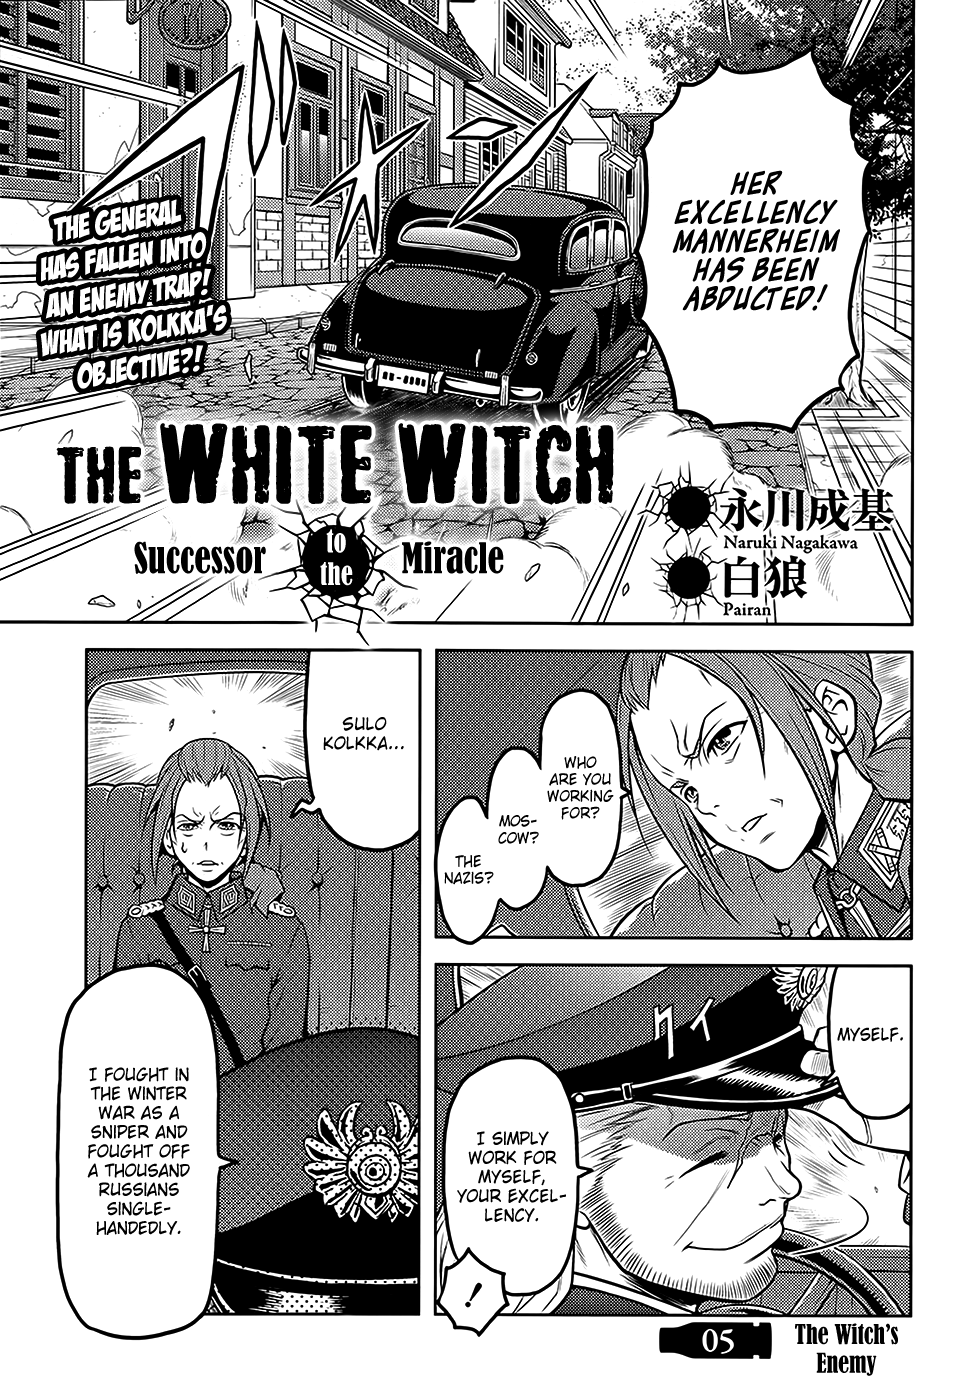 The White Witch - Beautiful Sniper - Page 2